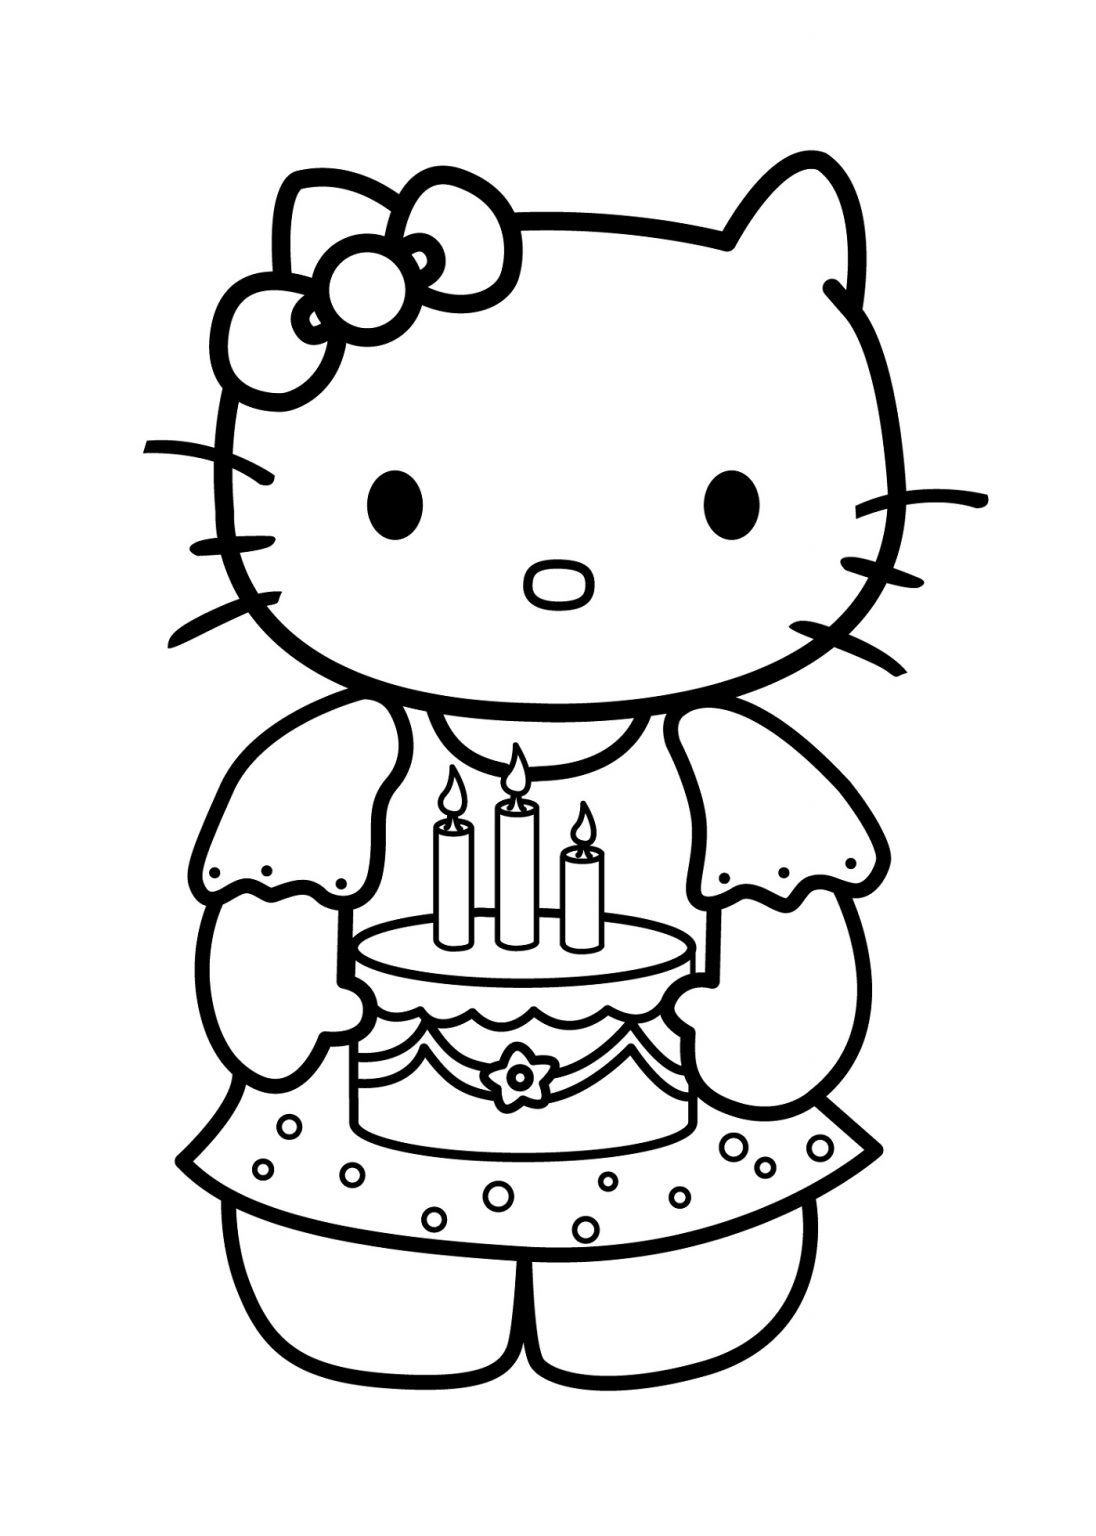 Kitty Cat Drawing Coloring Pages Coloring Pages